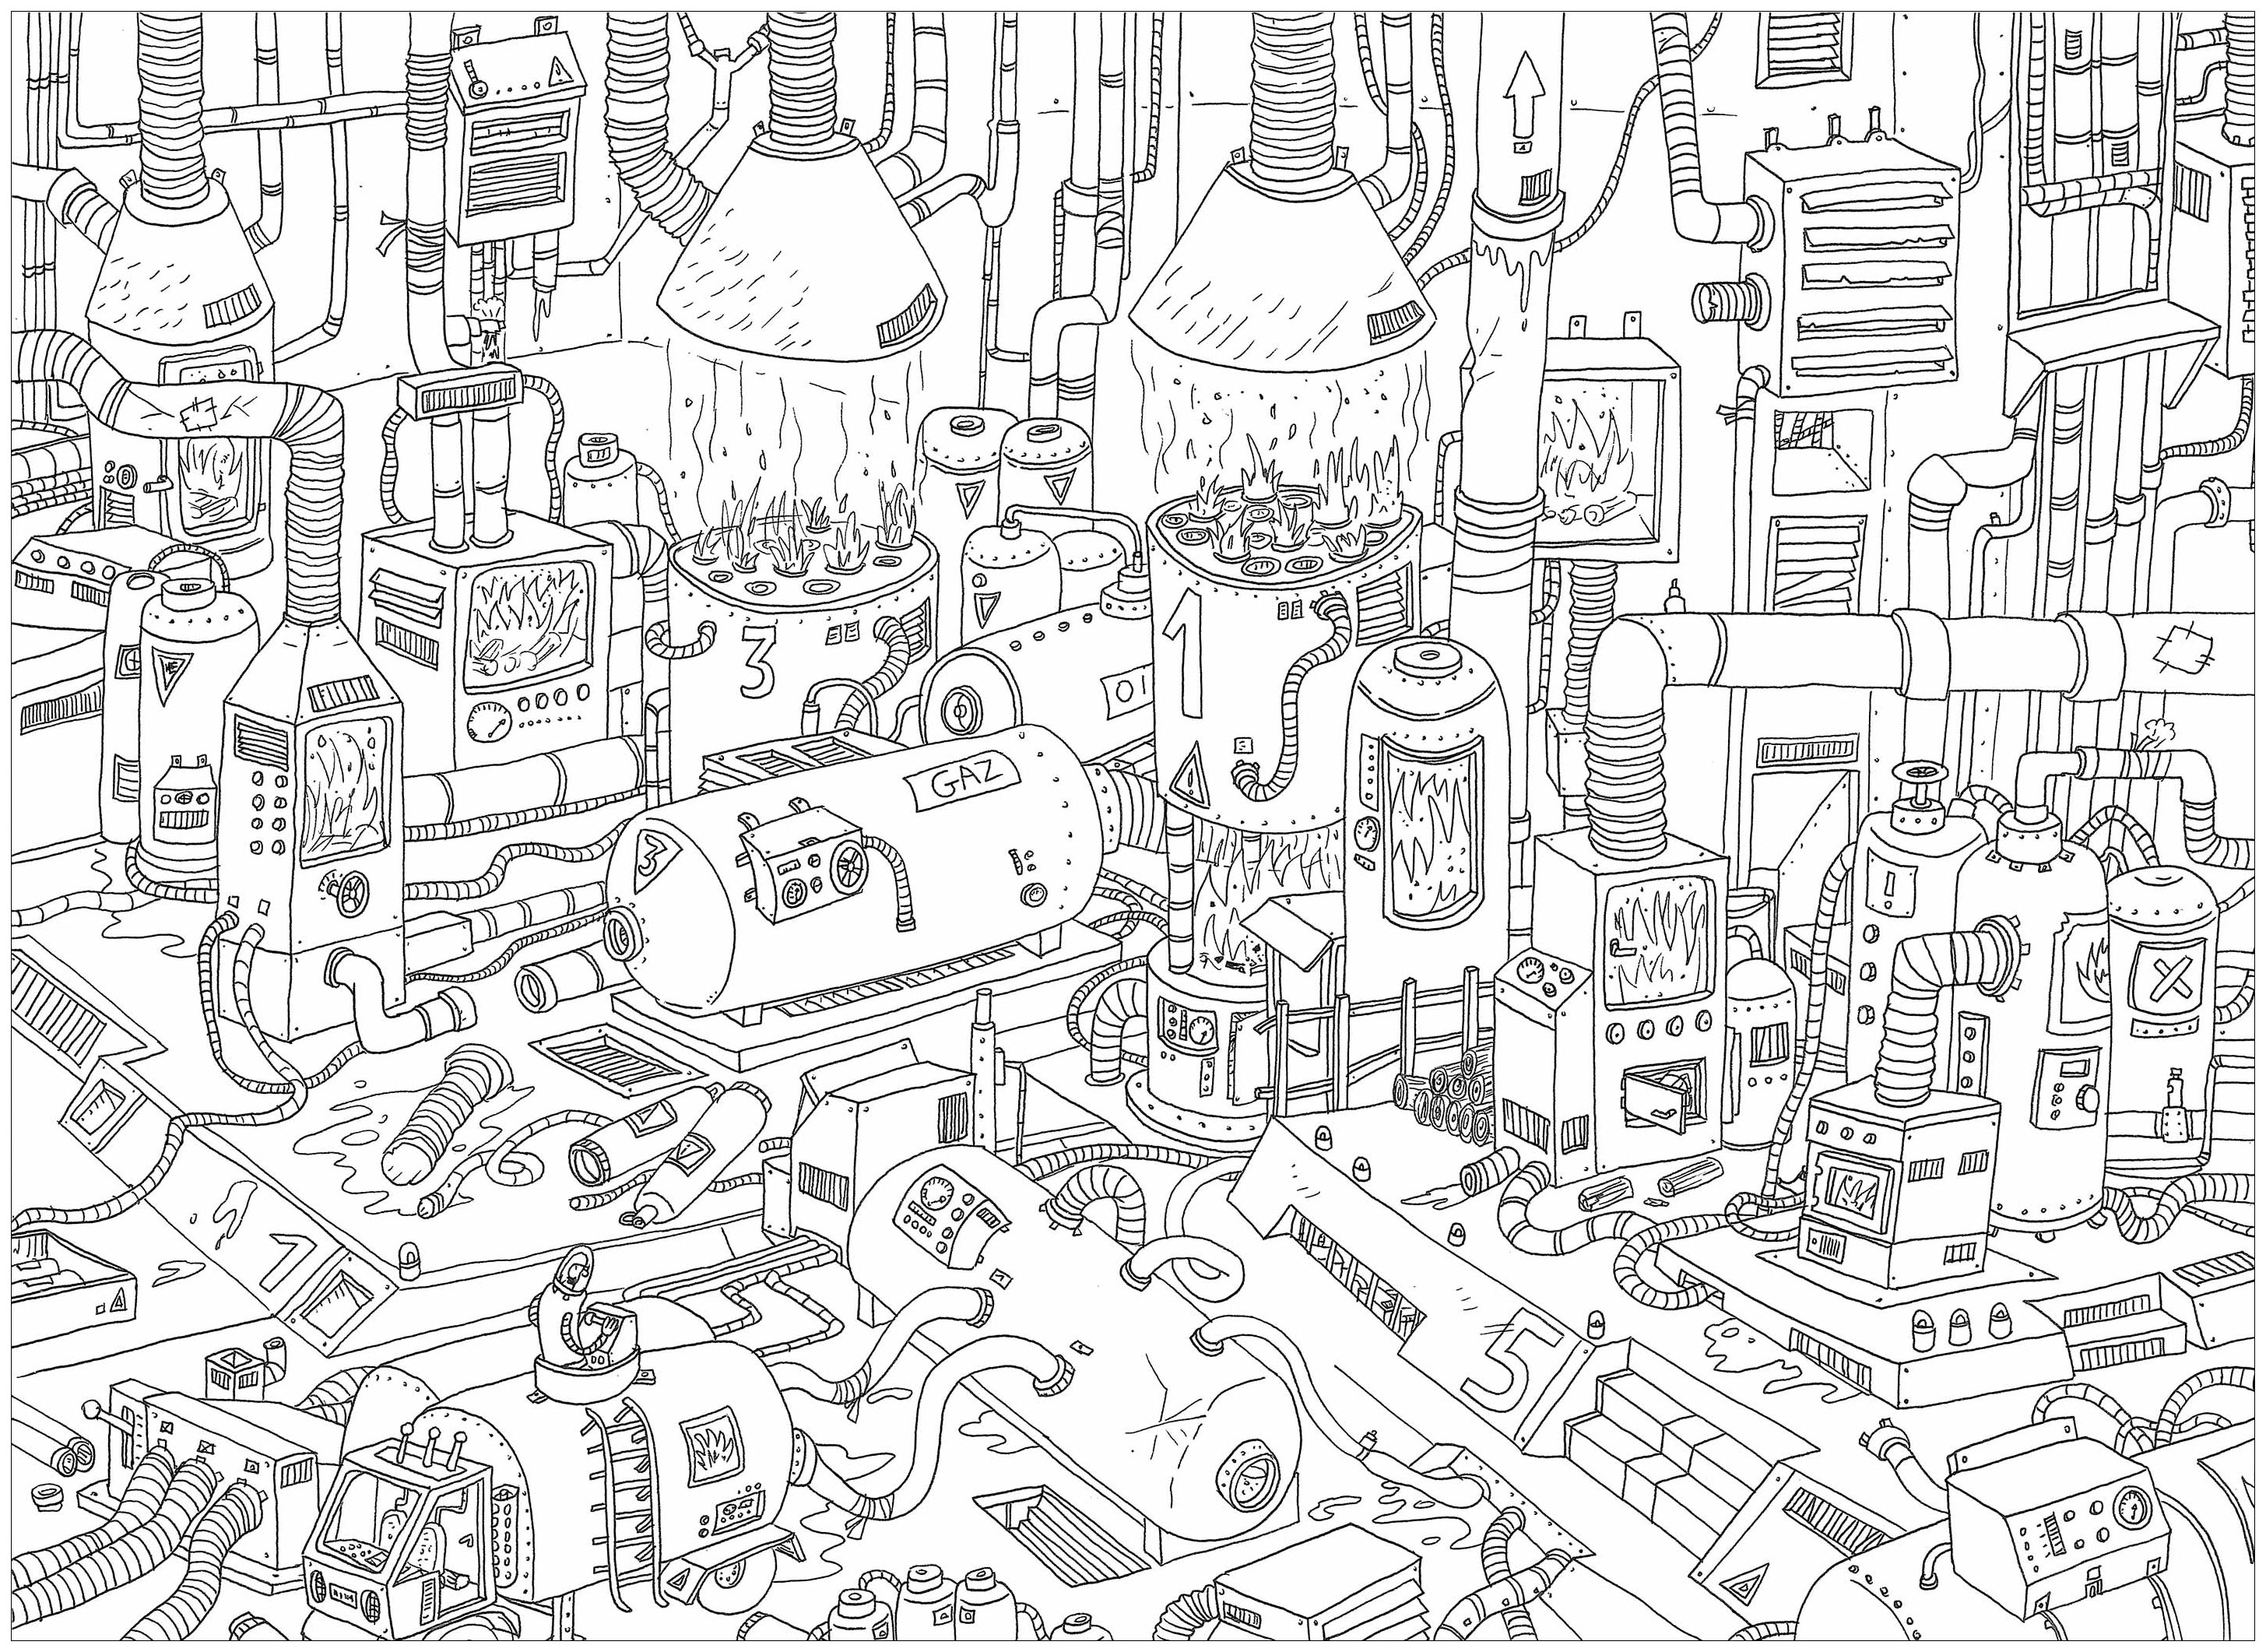 'Gas', a complex coloring page, 'Where is Waldo ?' style, Artist : Frédéric Brogard